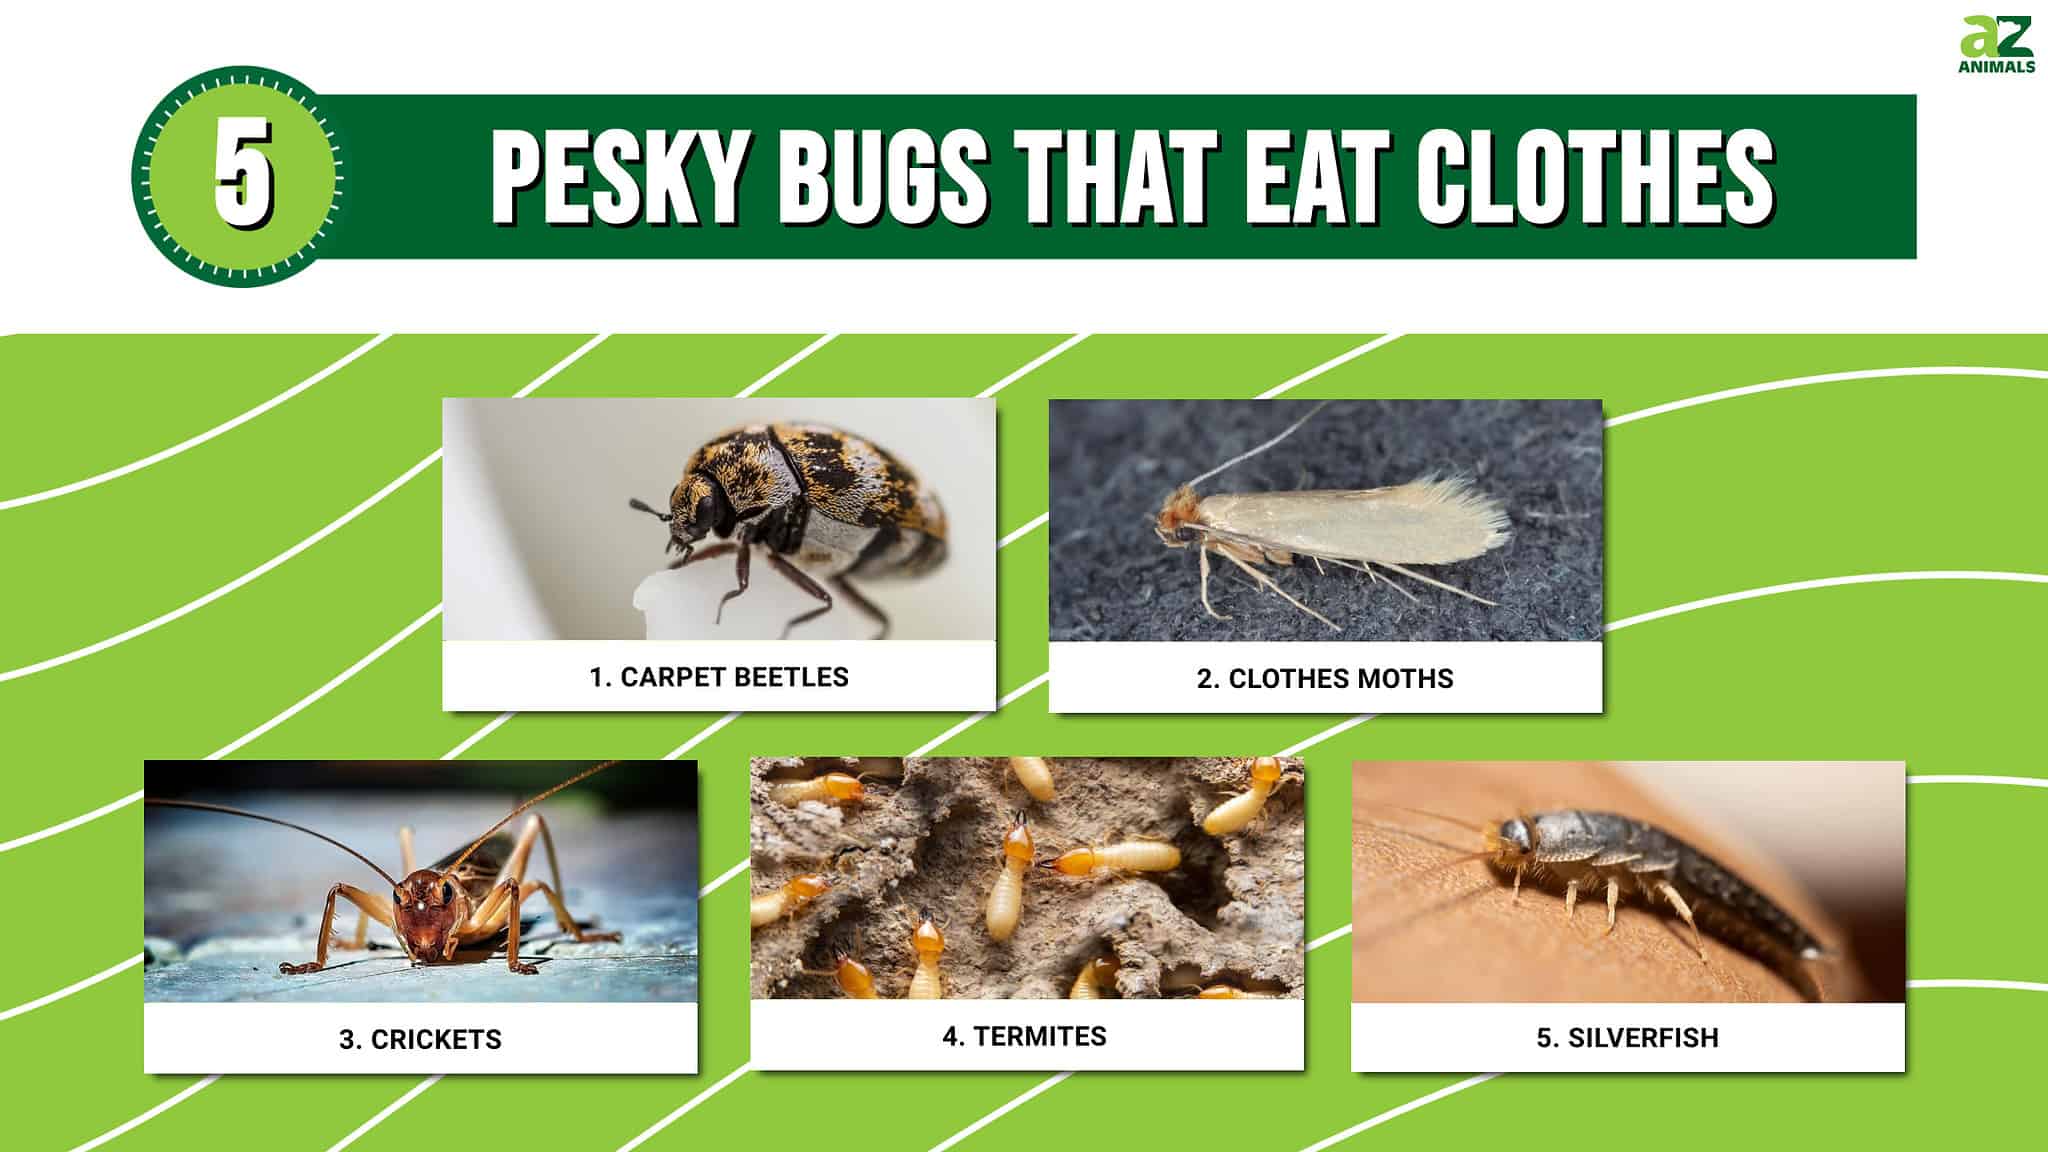 5 Pesky Bugs That Eat Clothes (And How To Get Rid of Them) - A-Z Animals